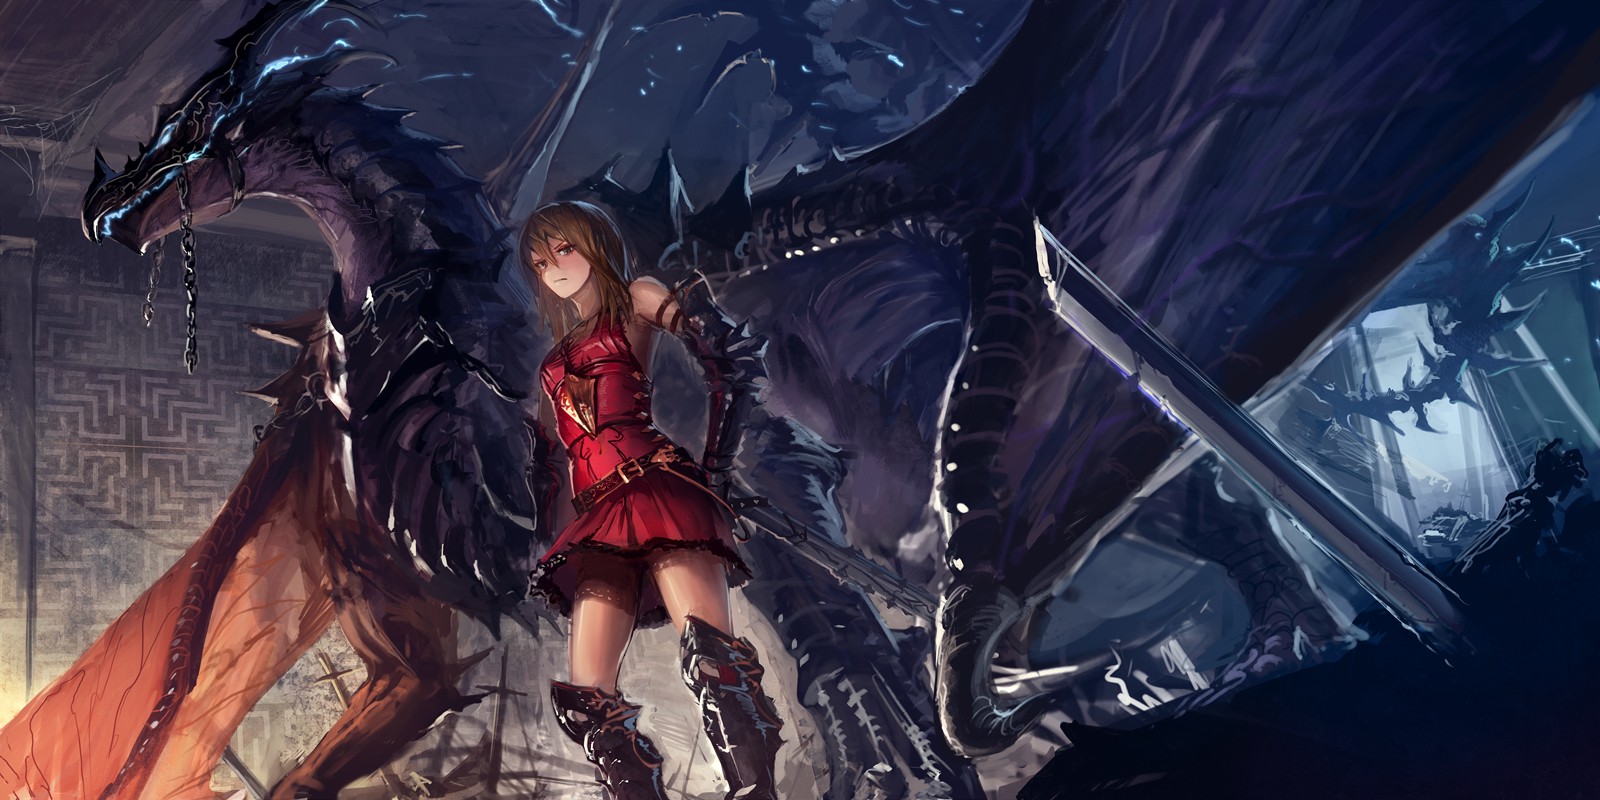 long Hair, Open Mouth, Looking At Viewer, Brunette, Brown Eyes, Looking Away, Standing, Fangs, Gloves, Weapon, Sword, Dragon Wings, Boots, Chains, Dragon, Anime, Anime Girls, Fantasy Art Wallpaper